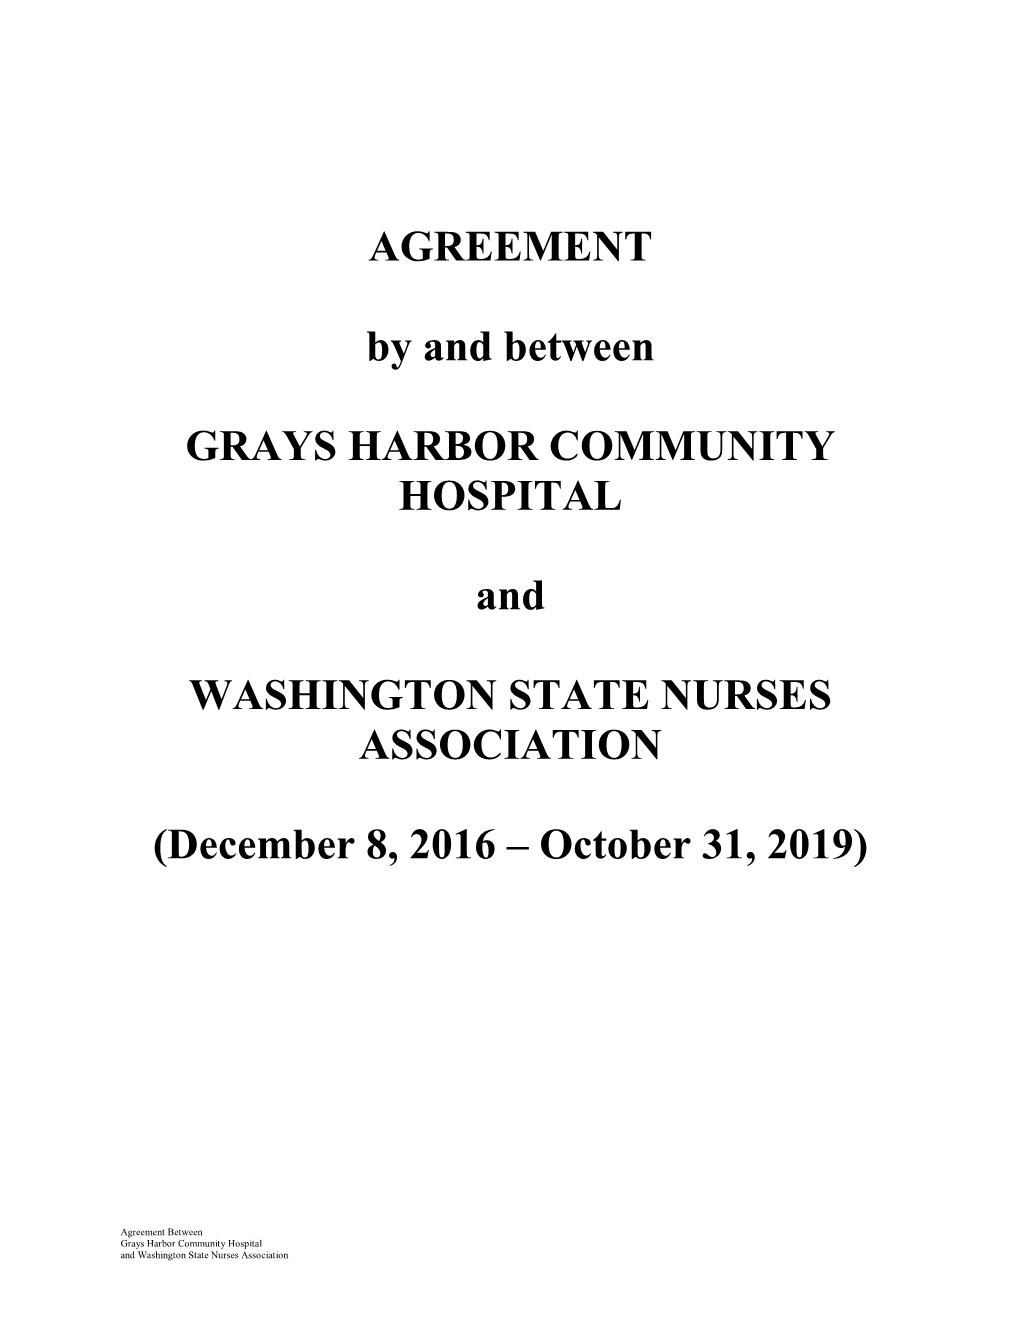 AGREEMENT by and Between GRAYS HARBOR COMMUNITY HOSPITAL and WASHINGTON STATE NURSES ASSOCIATION (December 8, 2016 – October 3